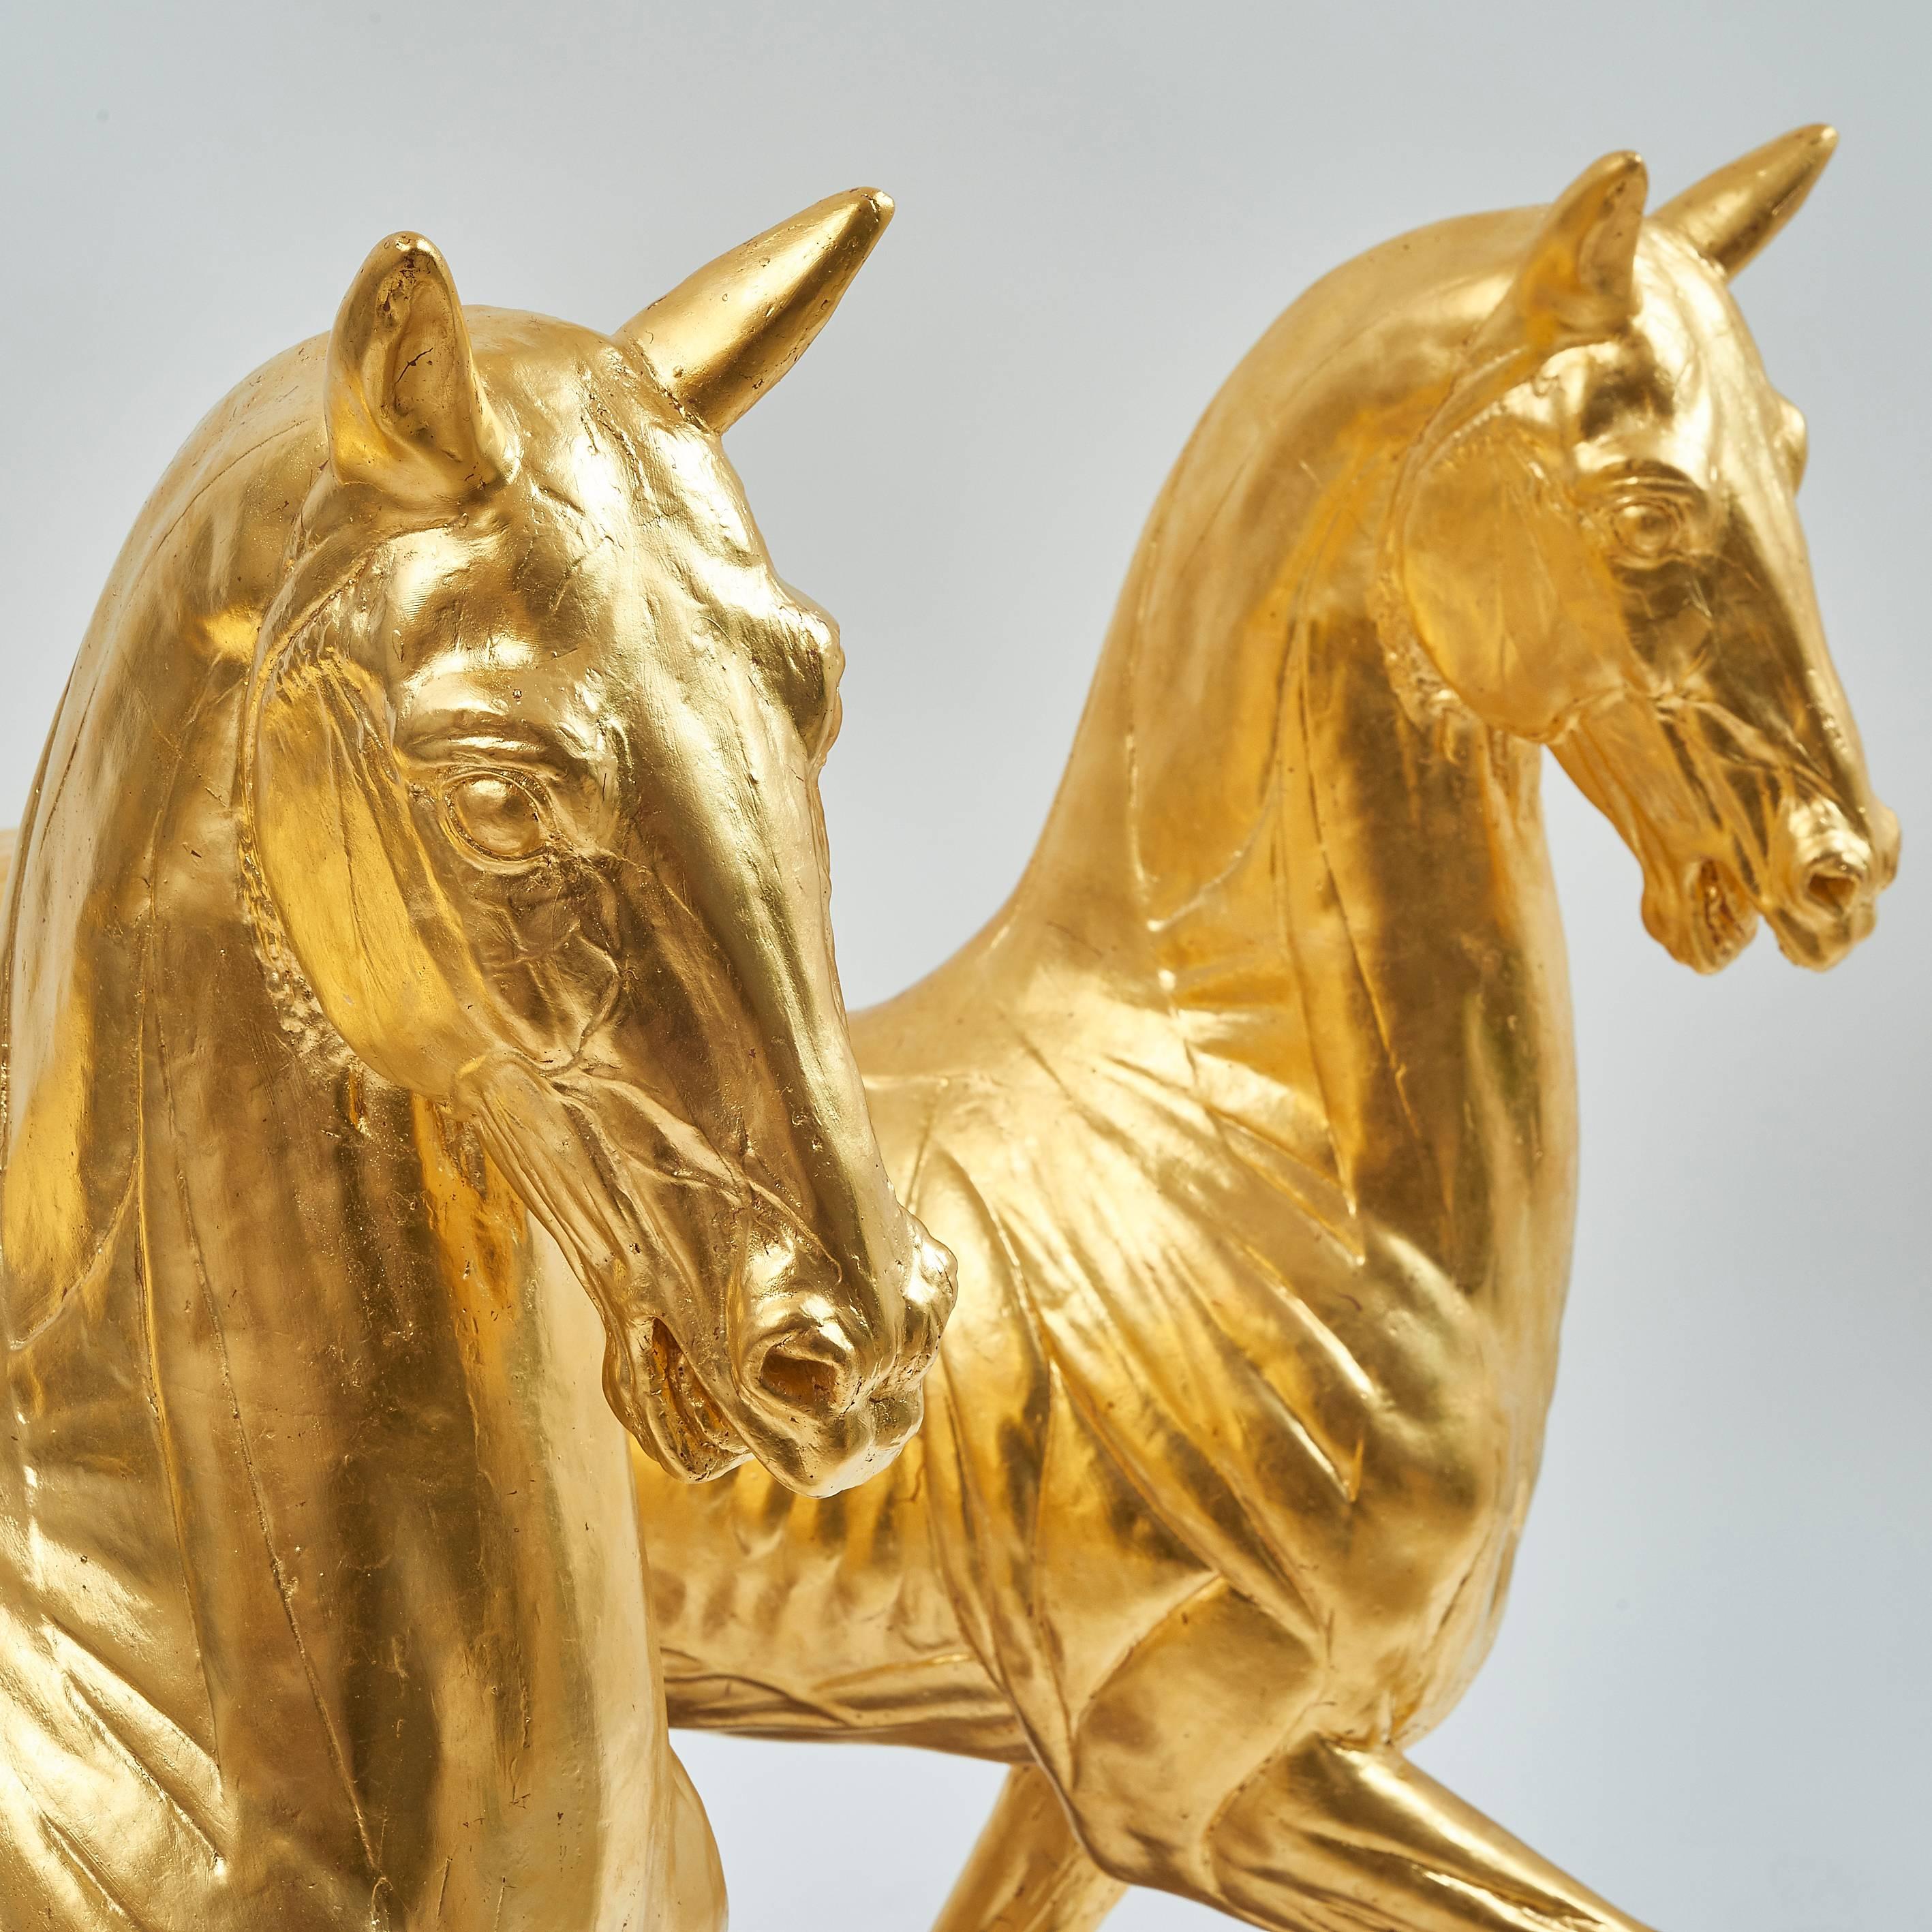 A pair of late 19th-early 20th century full scale gilded plaster pacing horses, representing the bronze flayed pacing horse sculpture by Giambologna, first created at the end of the 16th century and thought to have been influenced by some of